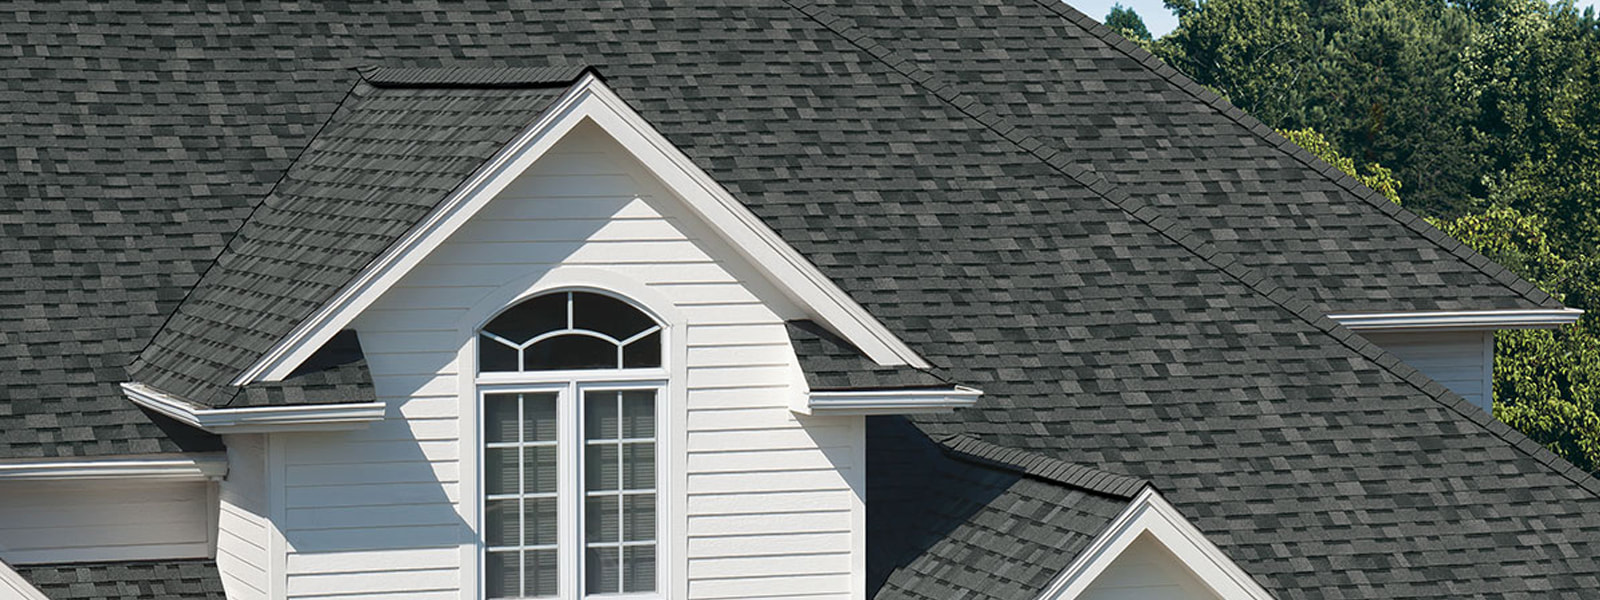 ROOFING CARE ATLANTA - Home